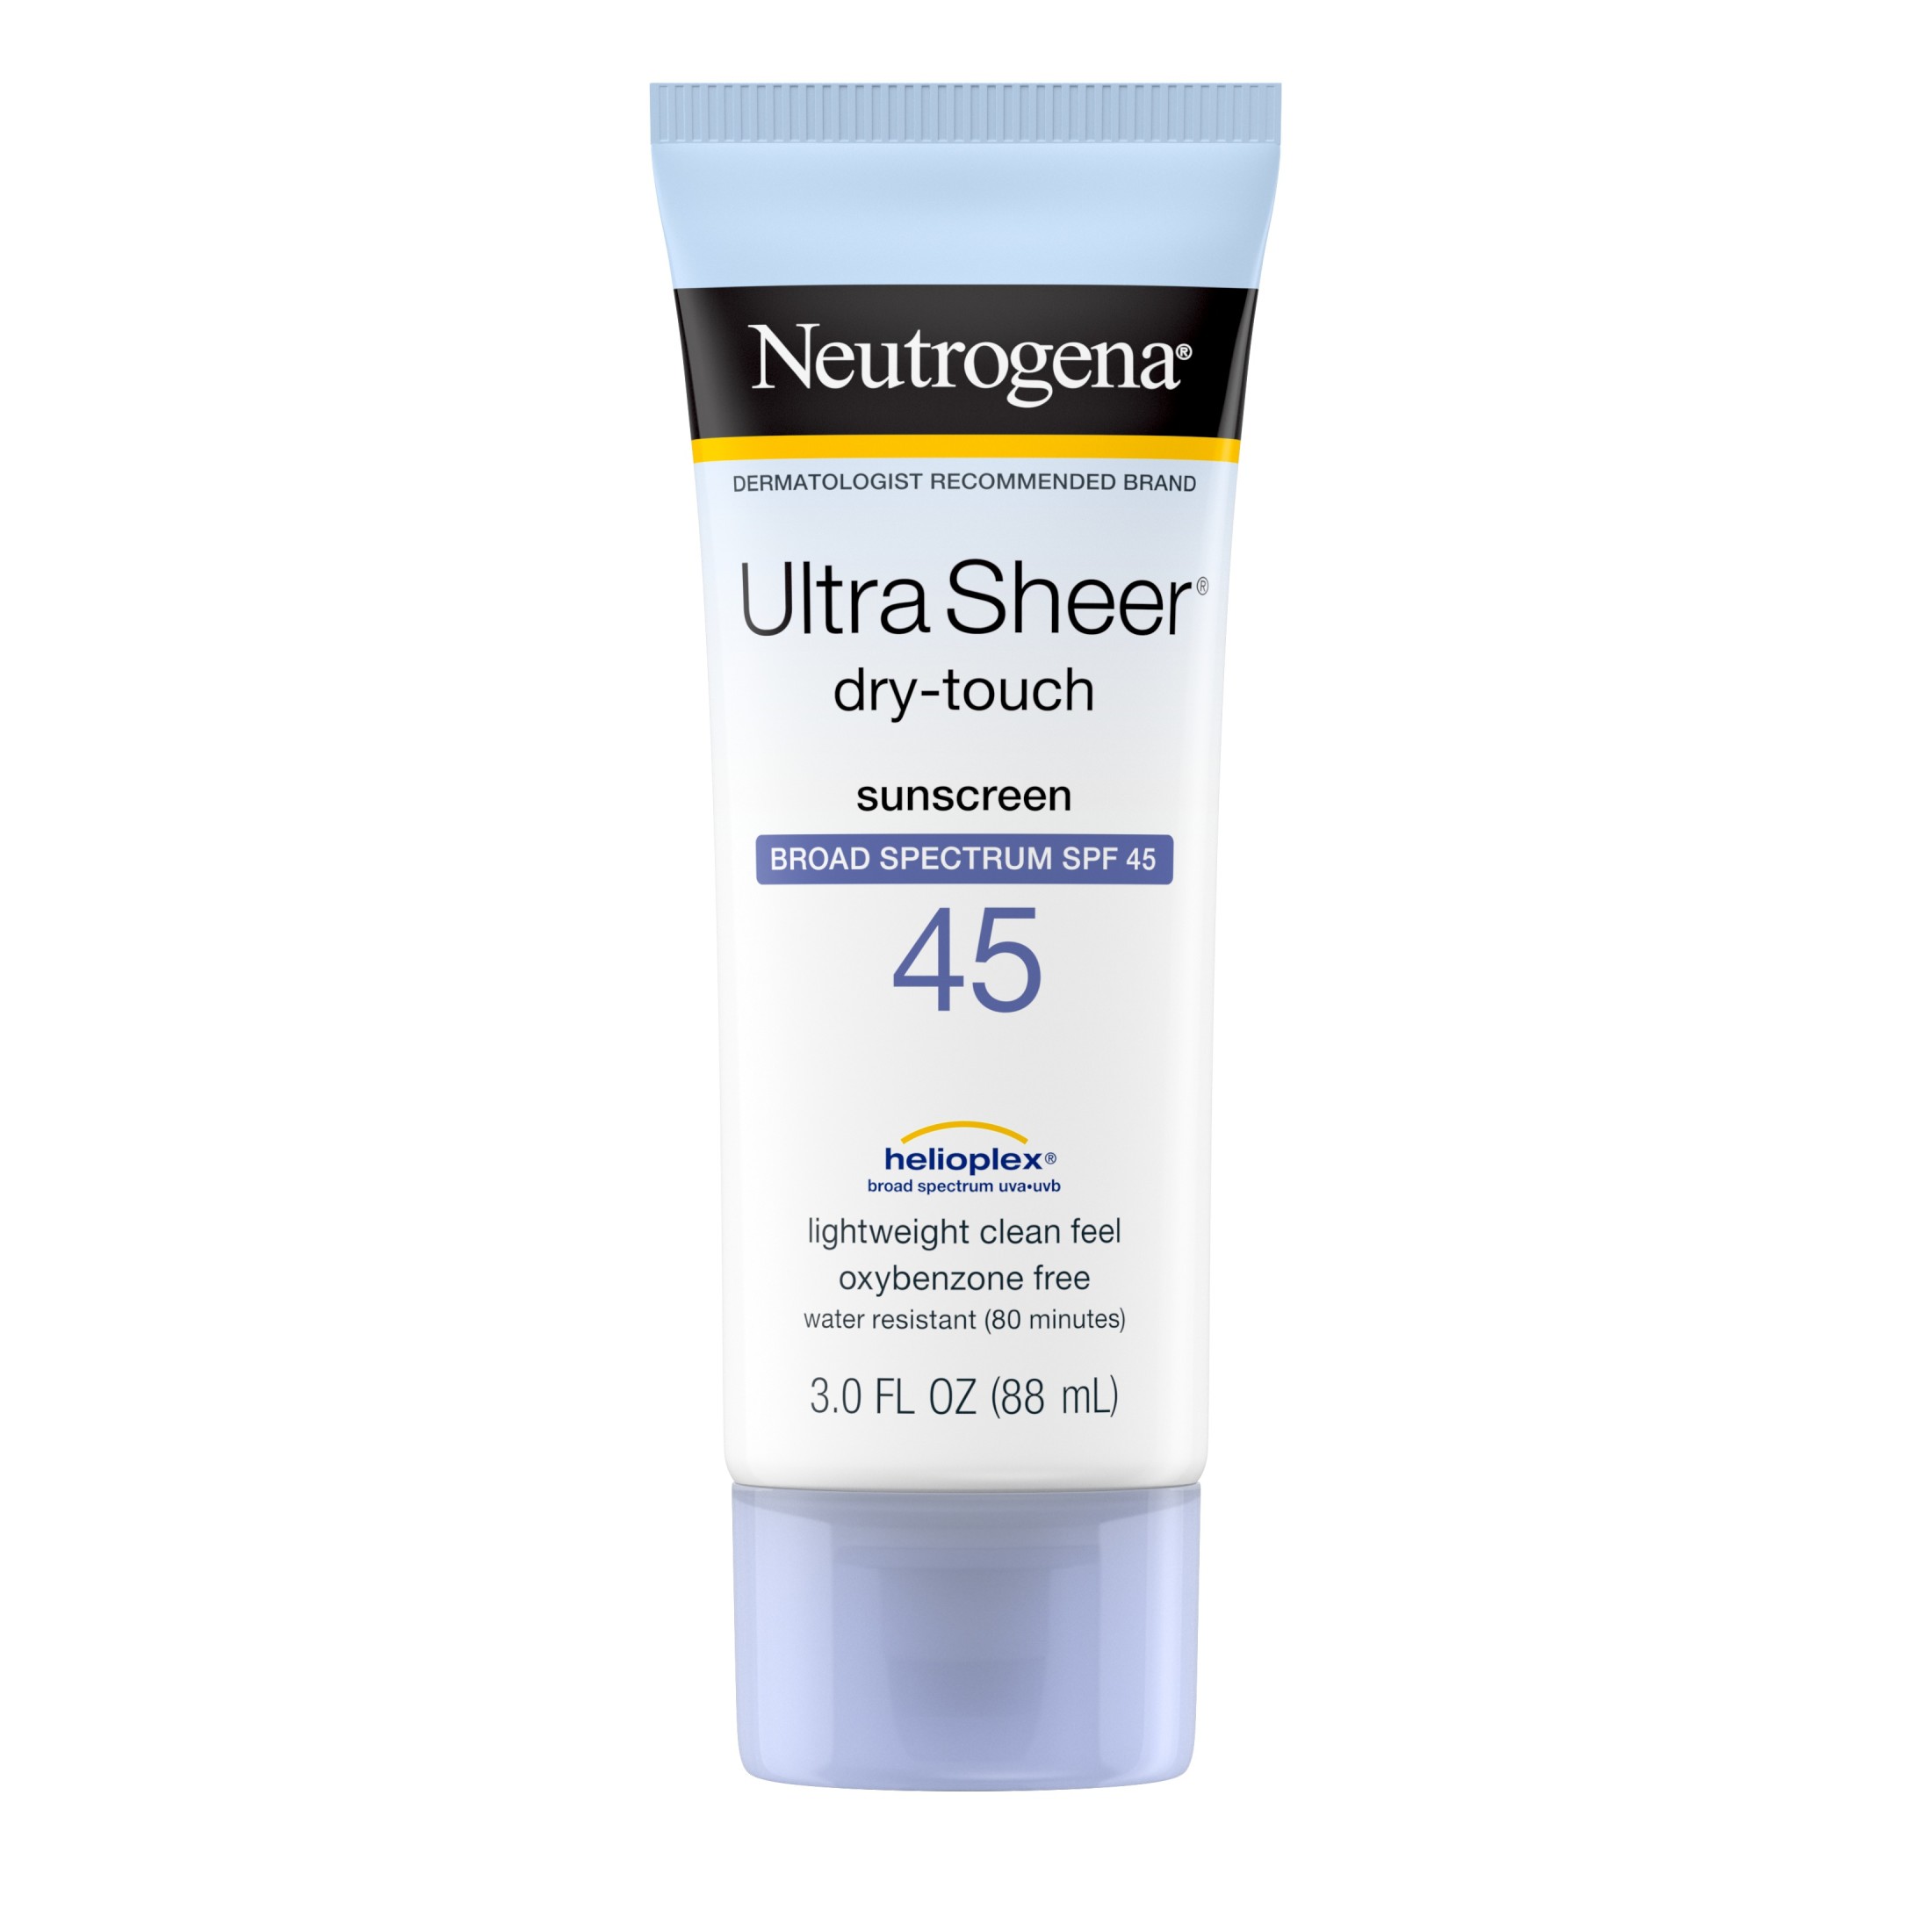 Neutrogena Ultra Sheer Dry-Touch SPF 45 Sunscreen Lotion, 3 fl. oz - image 1 of 9